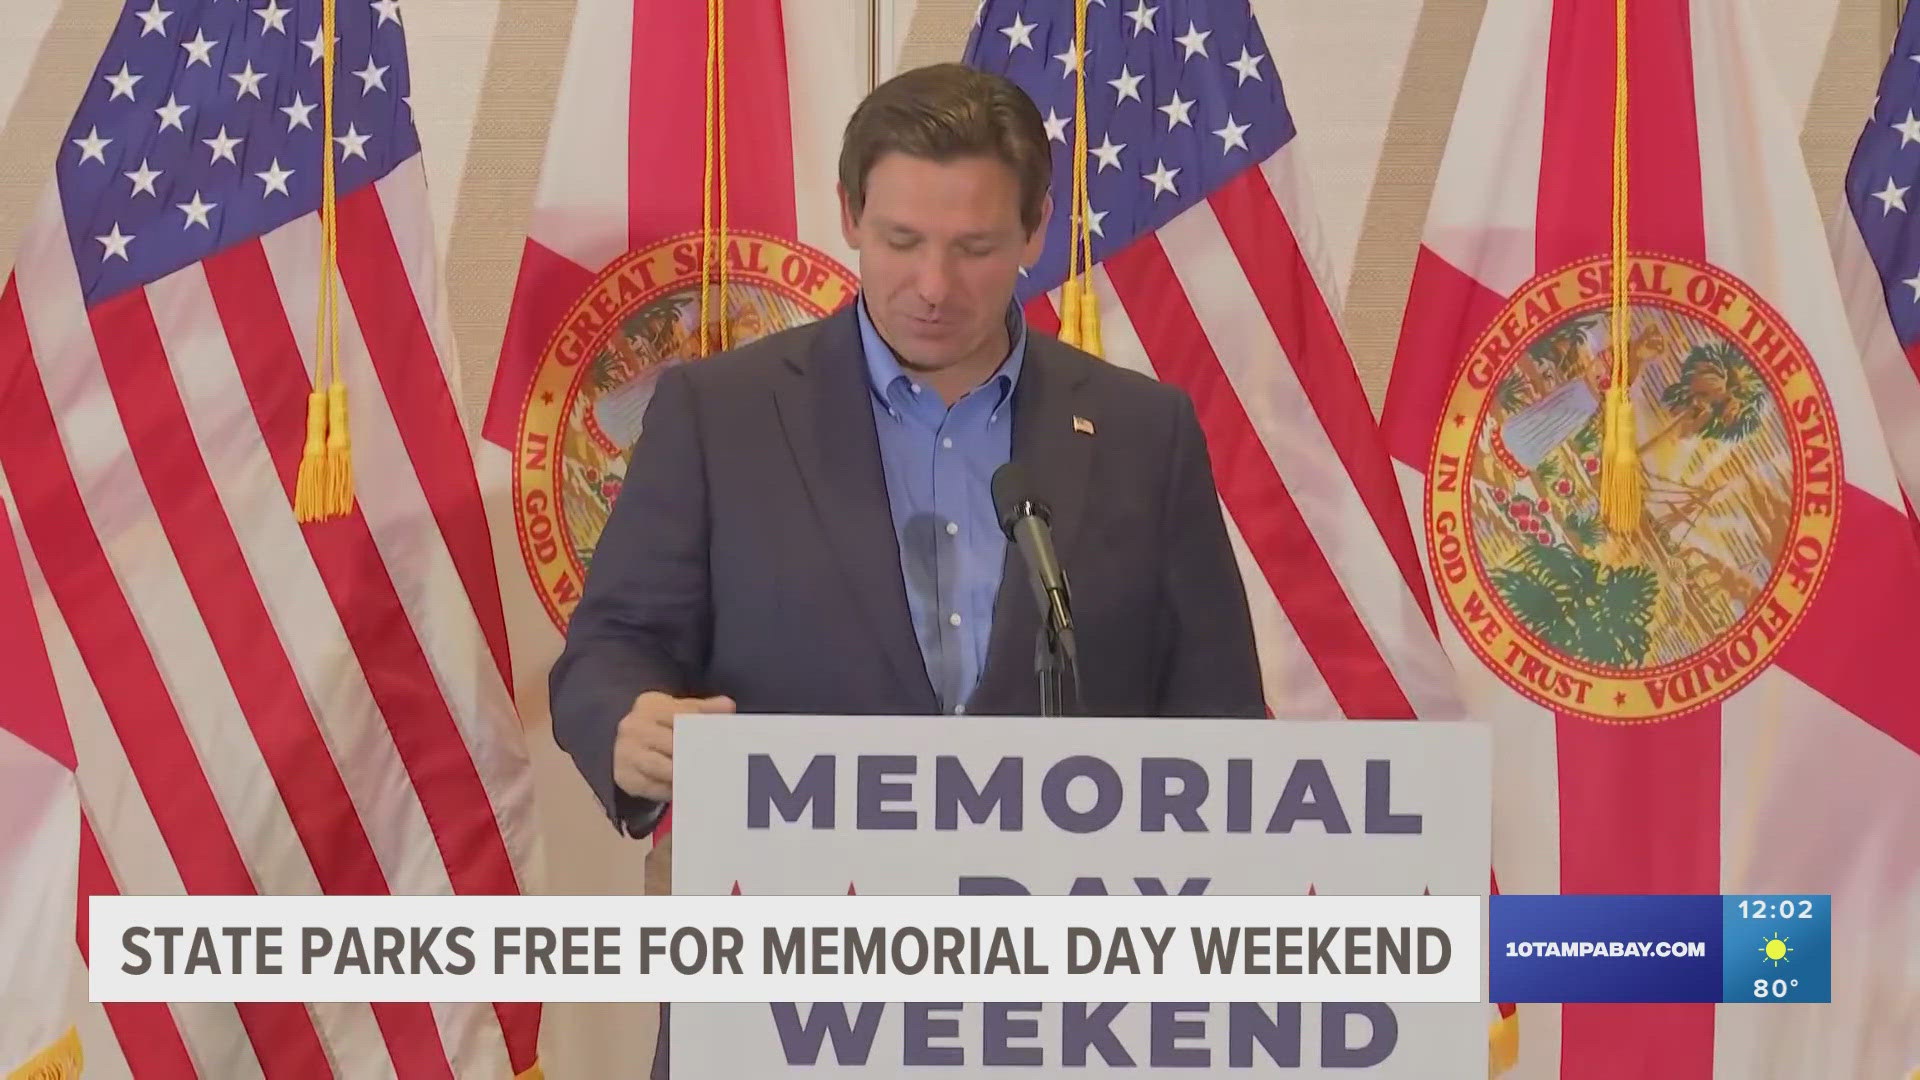 DeSantis is speaking on Tuesday in Tampa at the Tampa Bay History Center.